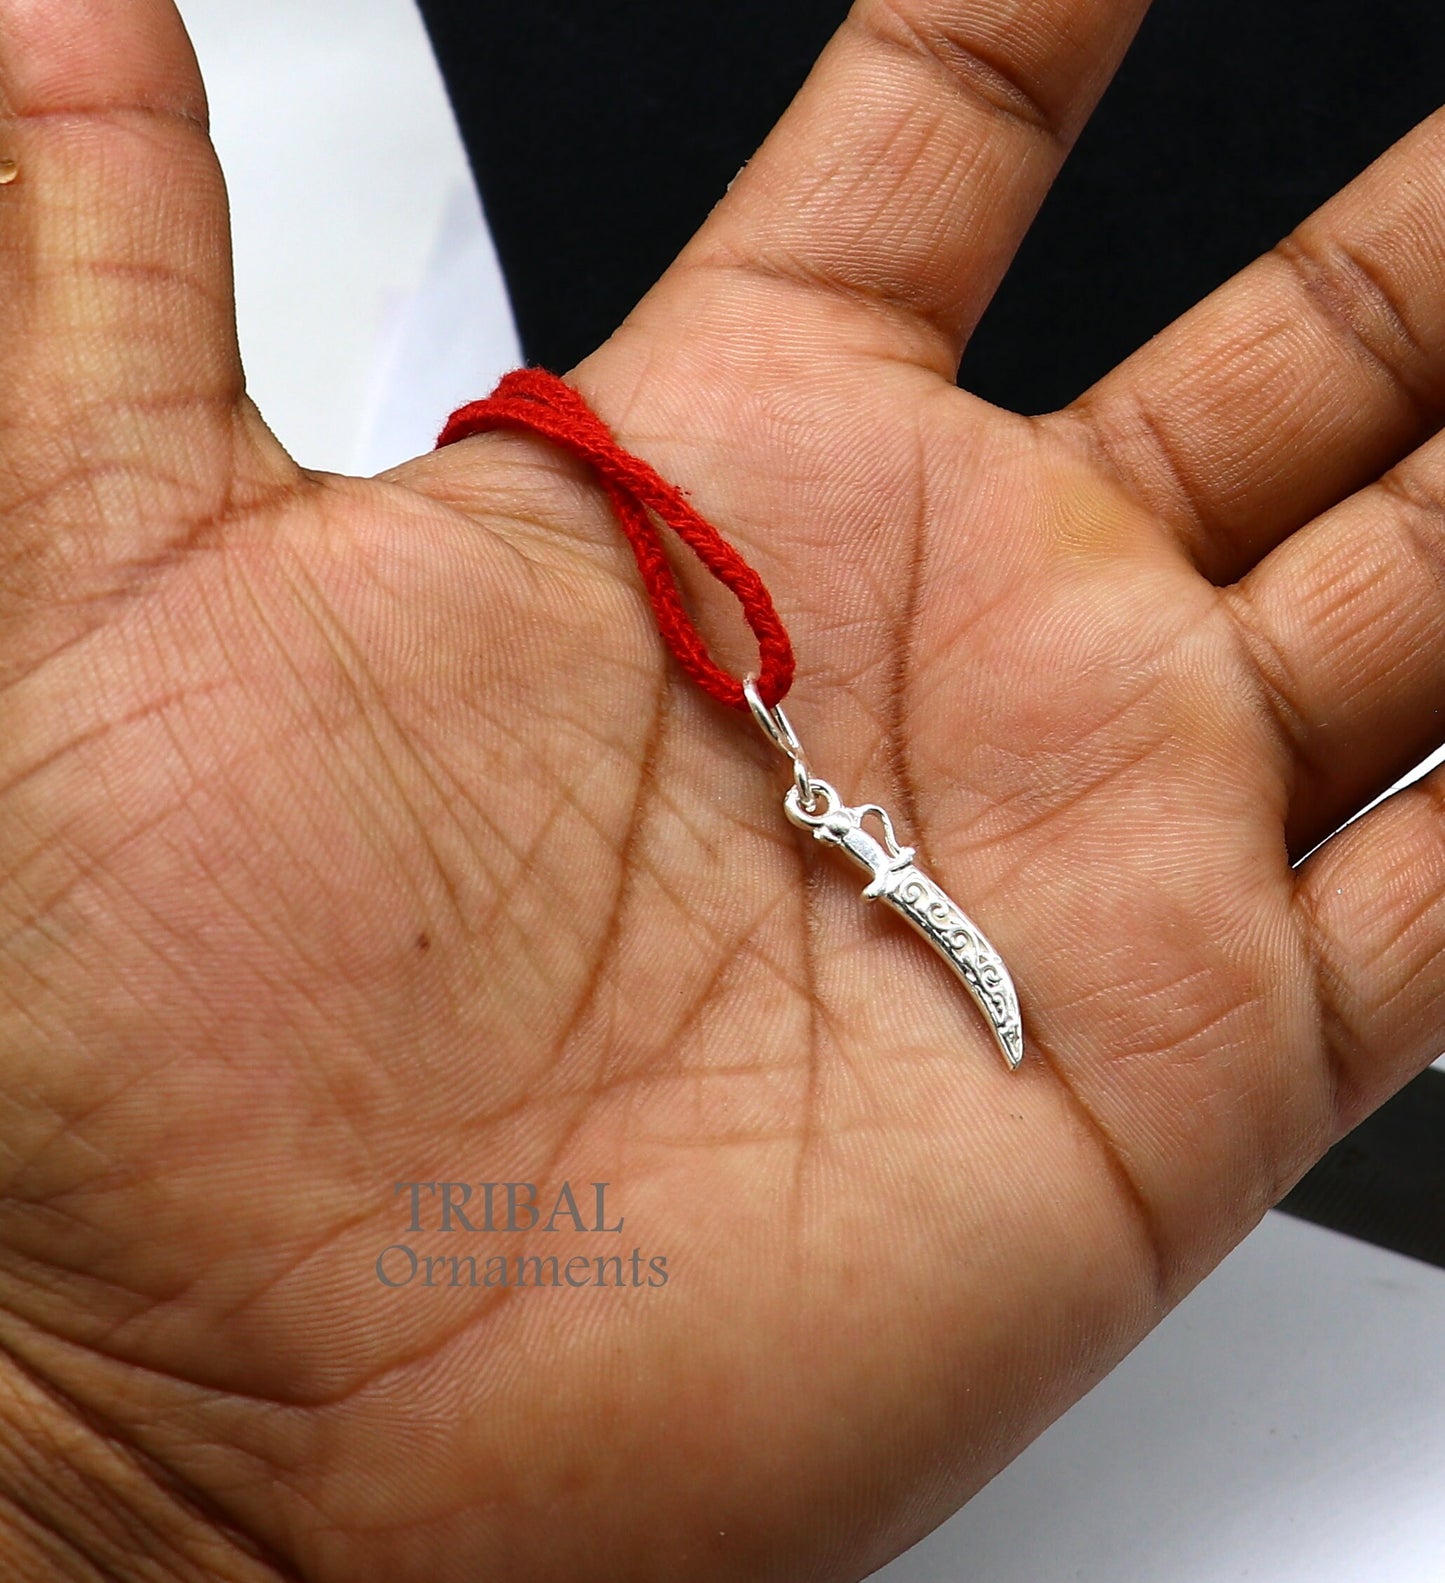 925 sterling silver handmade small tiny sword talwat kirpan knife pendant to protect you and kids from negative energy  nsp567 - TRIBAL ORNAMENTS